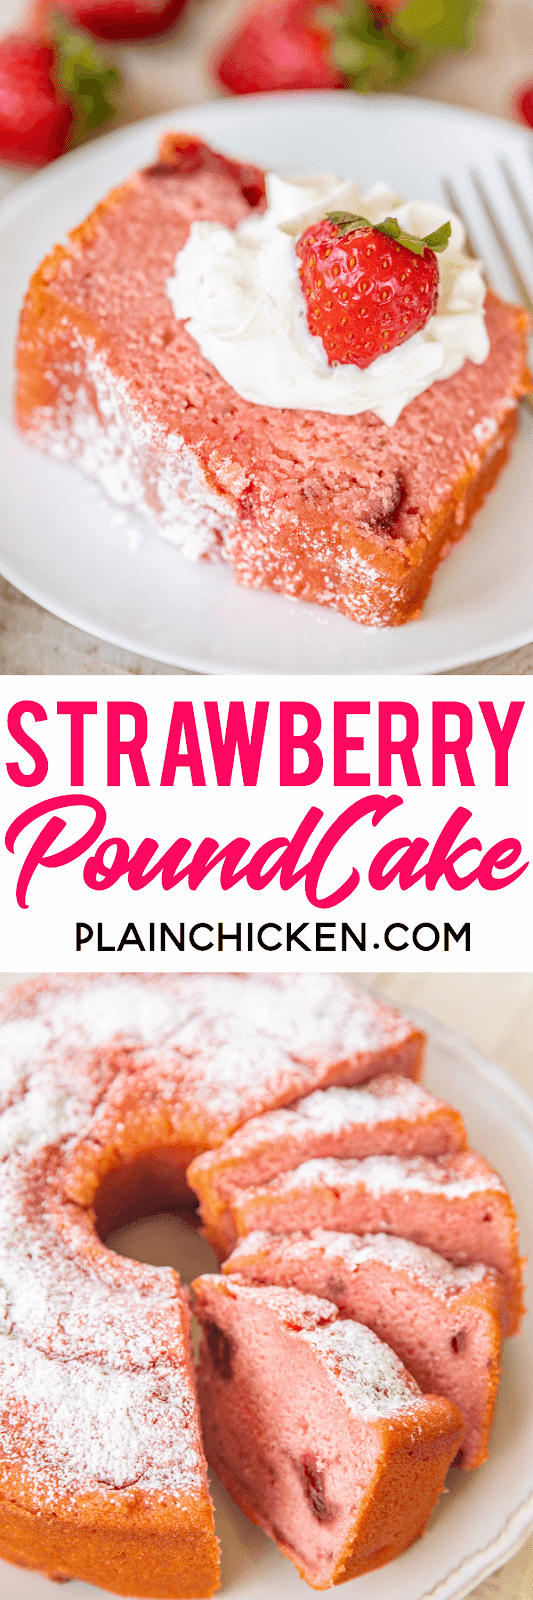 Strawberry Pound Cake - THE BEST strawberry pound cake I've ever eaten! Packed FULL of delicious strawberry flavor! Flour, baking powder, salt, eggs, milk, vanilla, butter, sugar, strawberry jello, frozen strawberries in sugar. Top with whipped cream, vanilla ice cream and fresh strawberries. Can freeze for a quick dessert later. Great for potlucks! #strawberry #poundcake #dessert #cake